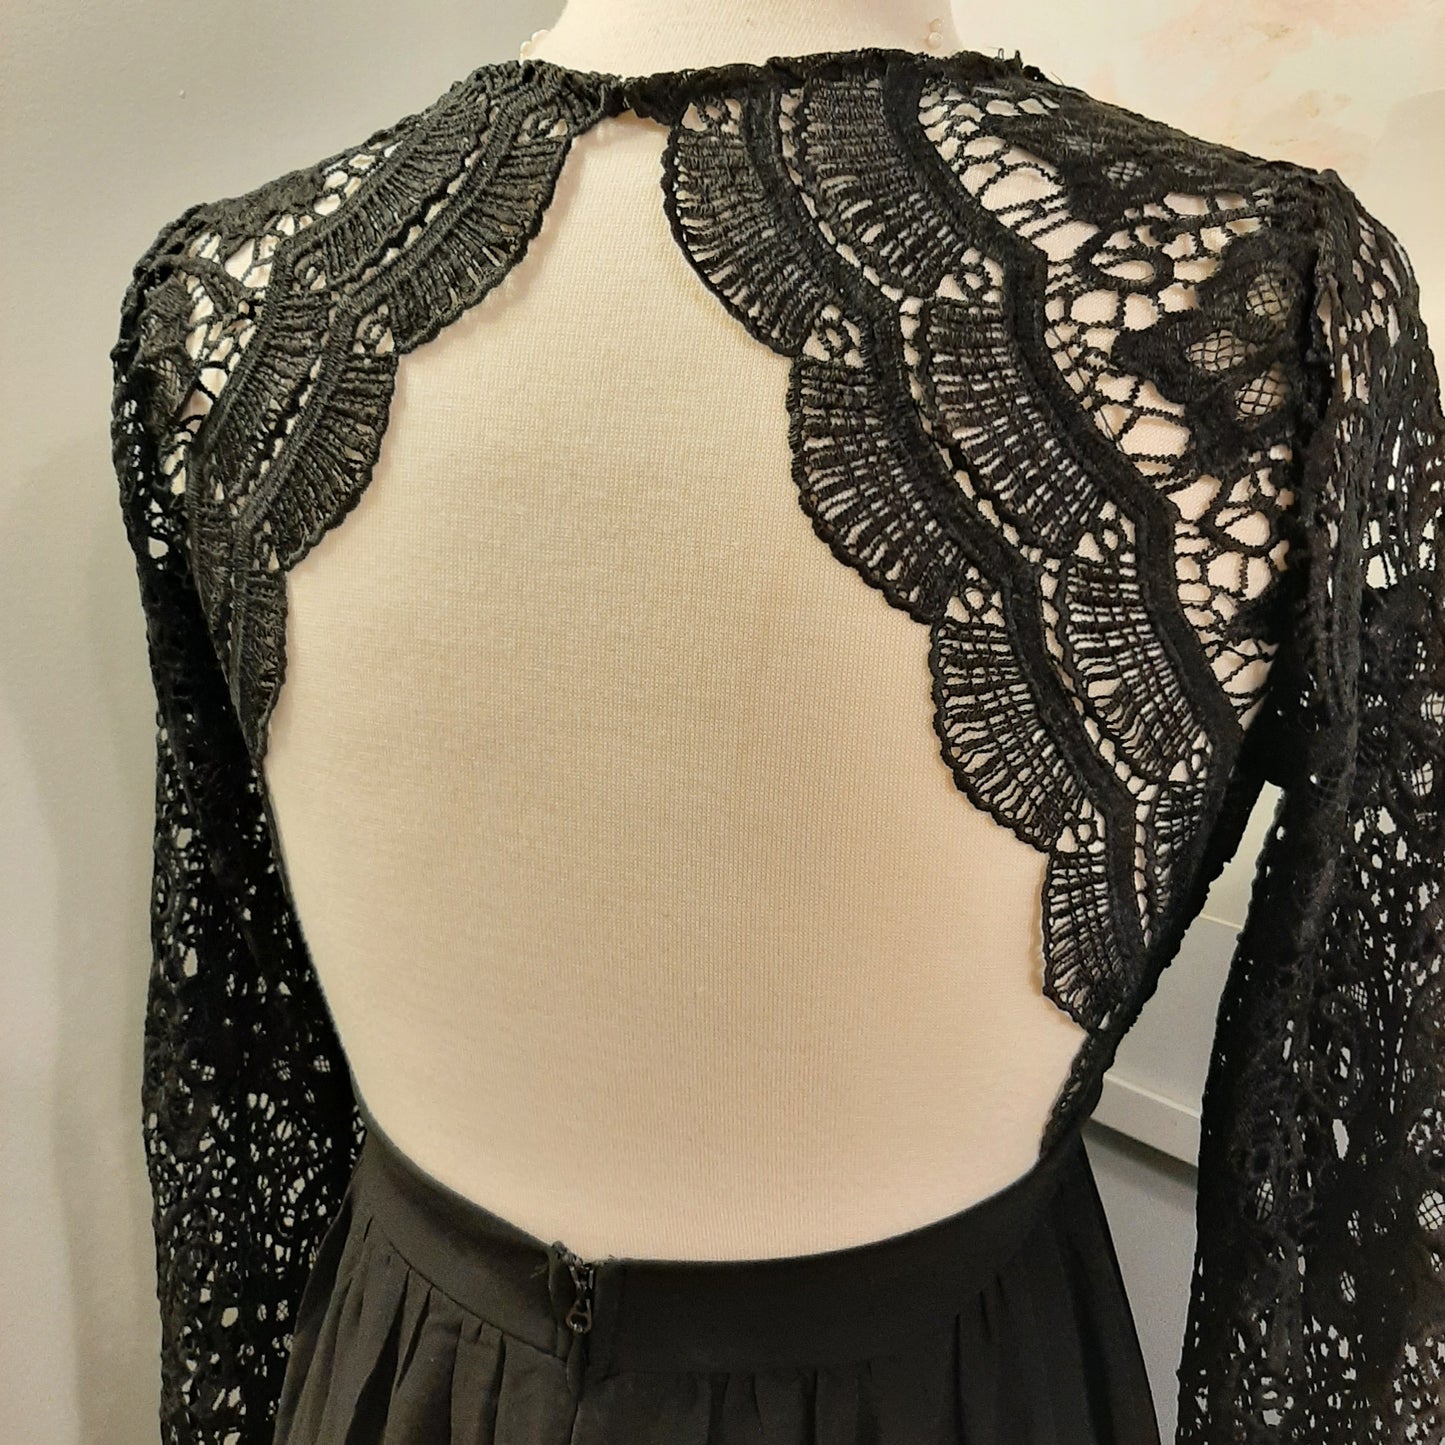 Bare Back Lace in Black